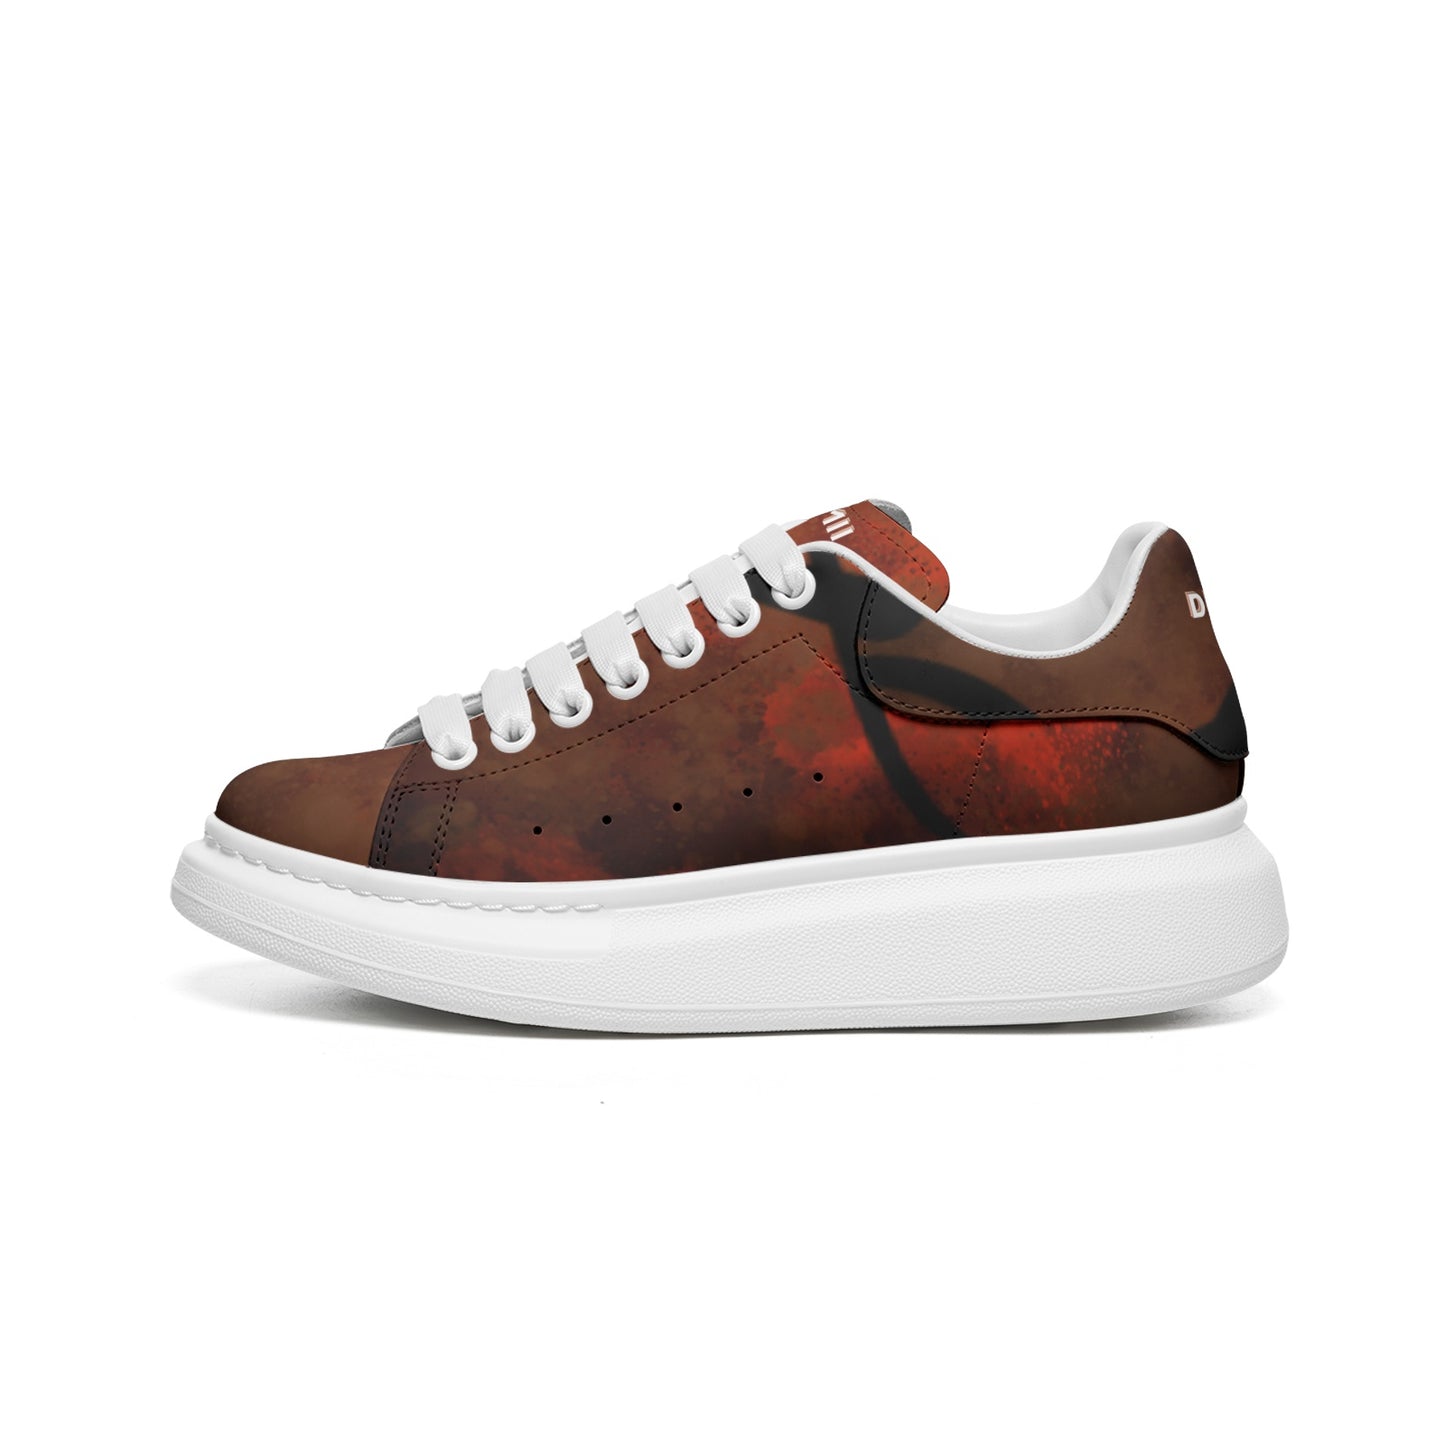 DuGamii Unisex Non Slip Lace Up Leather "Blood Moon" Sneakers